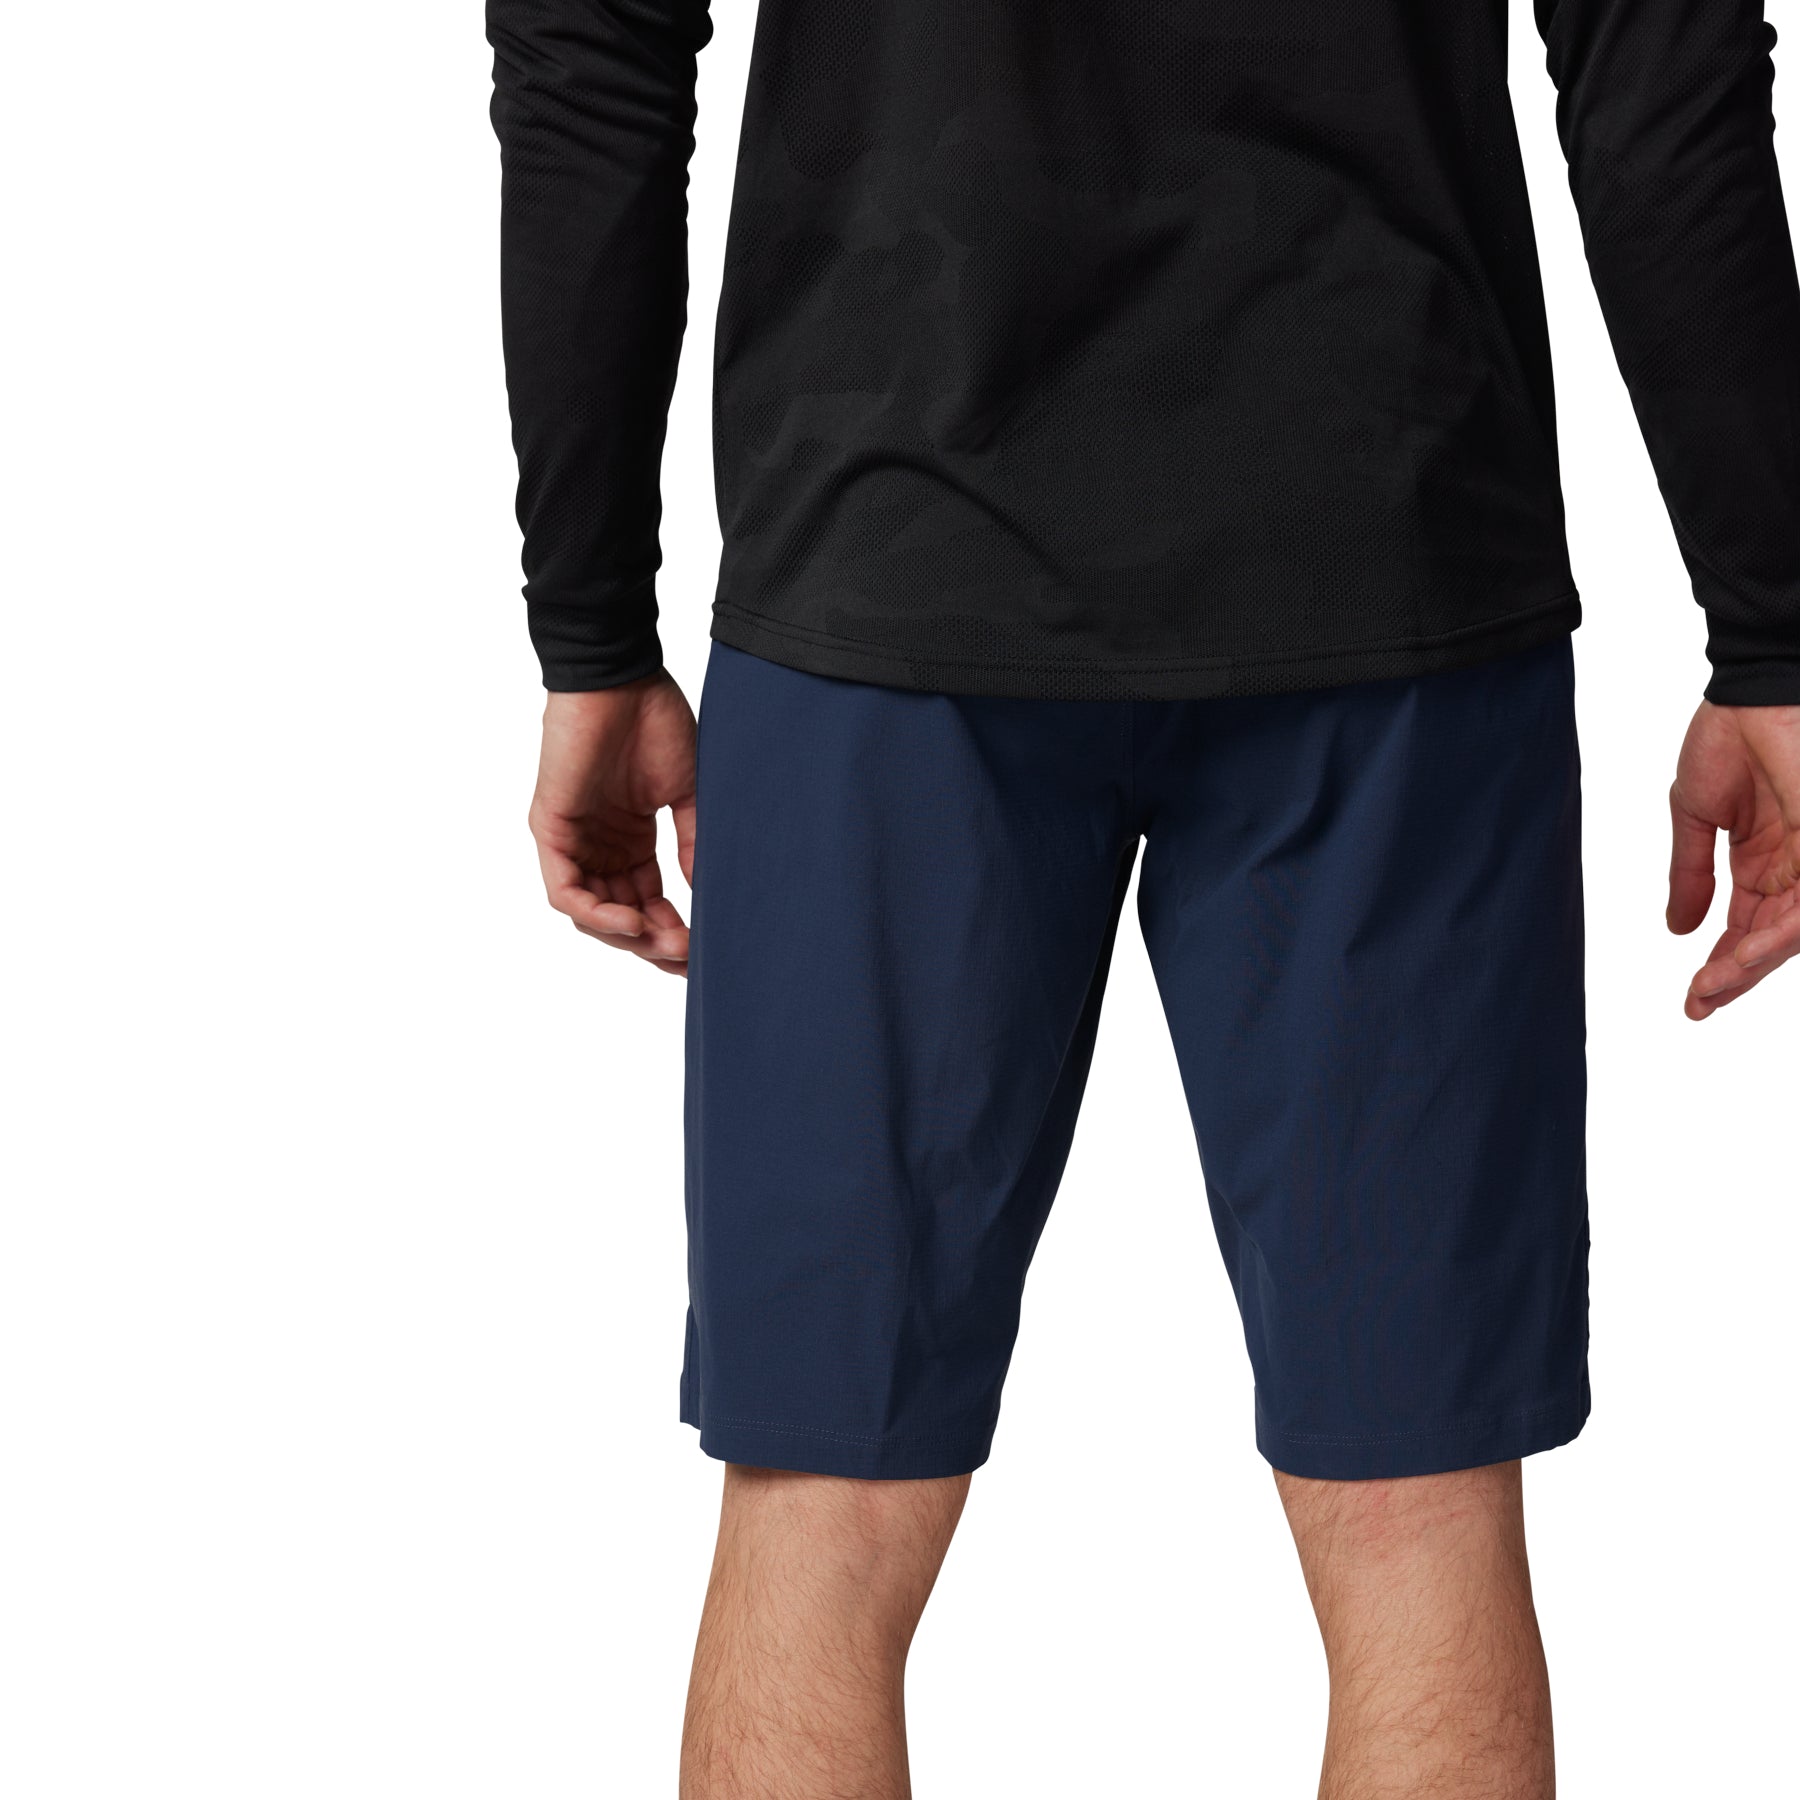 Fox Ranger Shorts Without Liner - L-34 - Midnight - Image 2